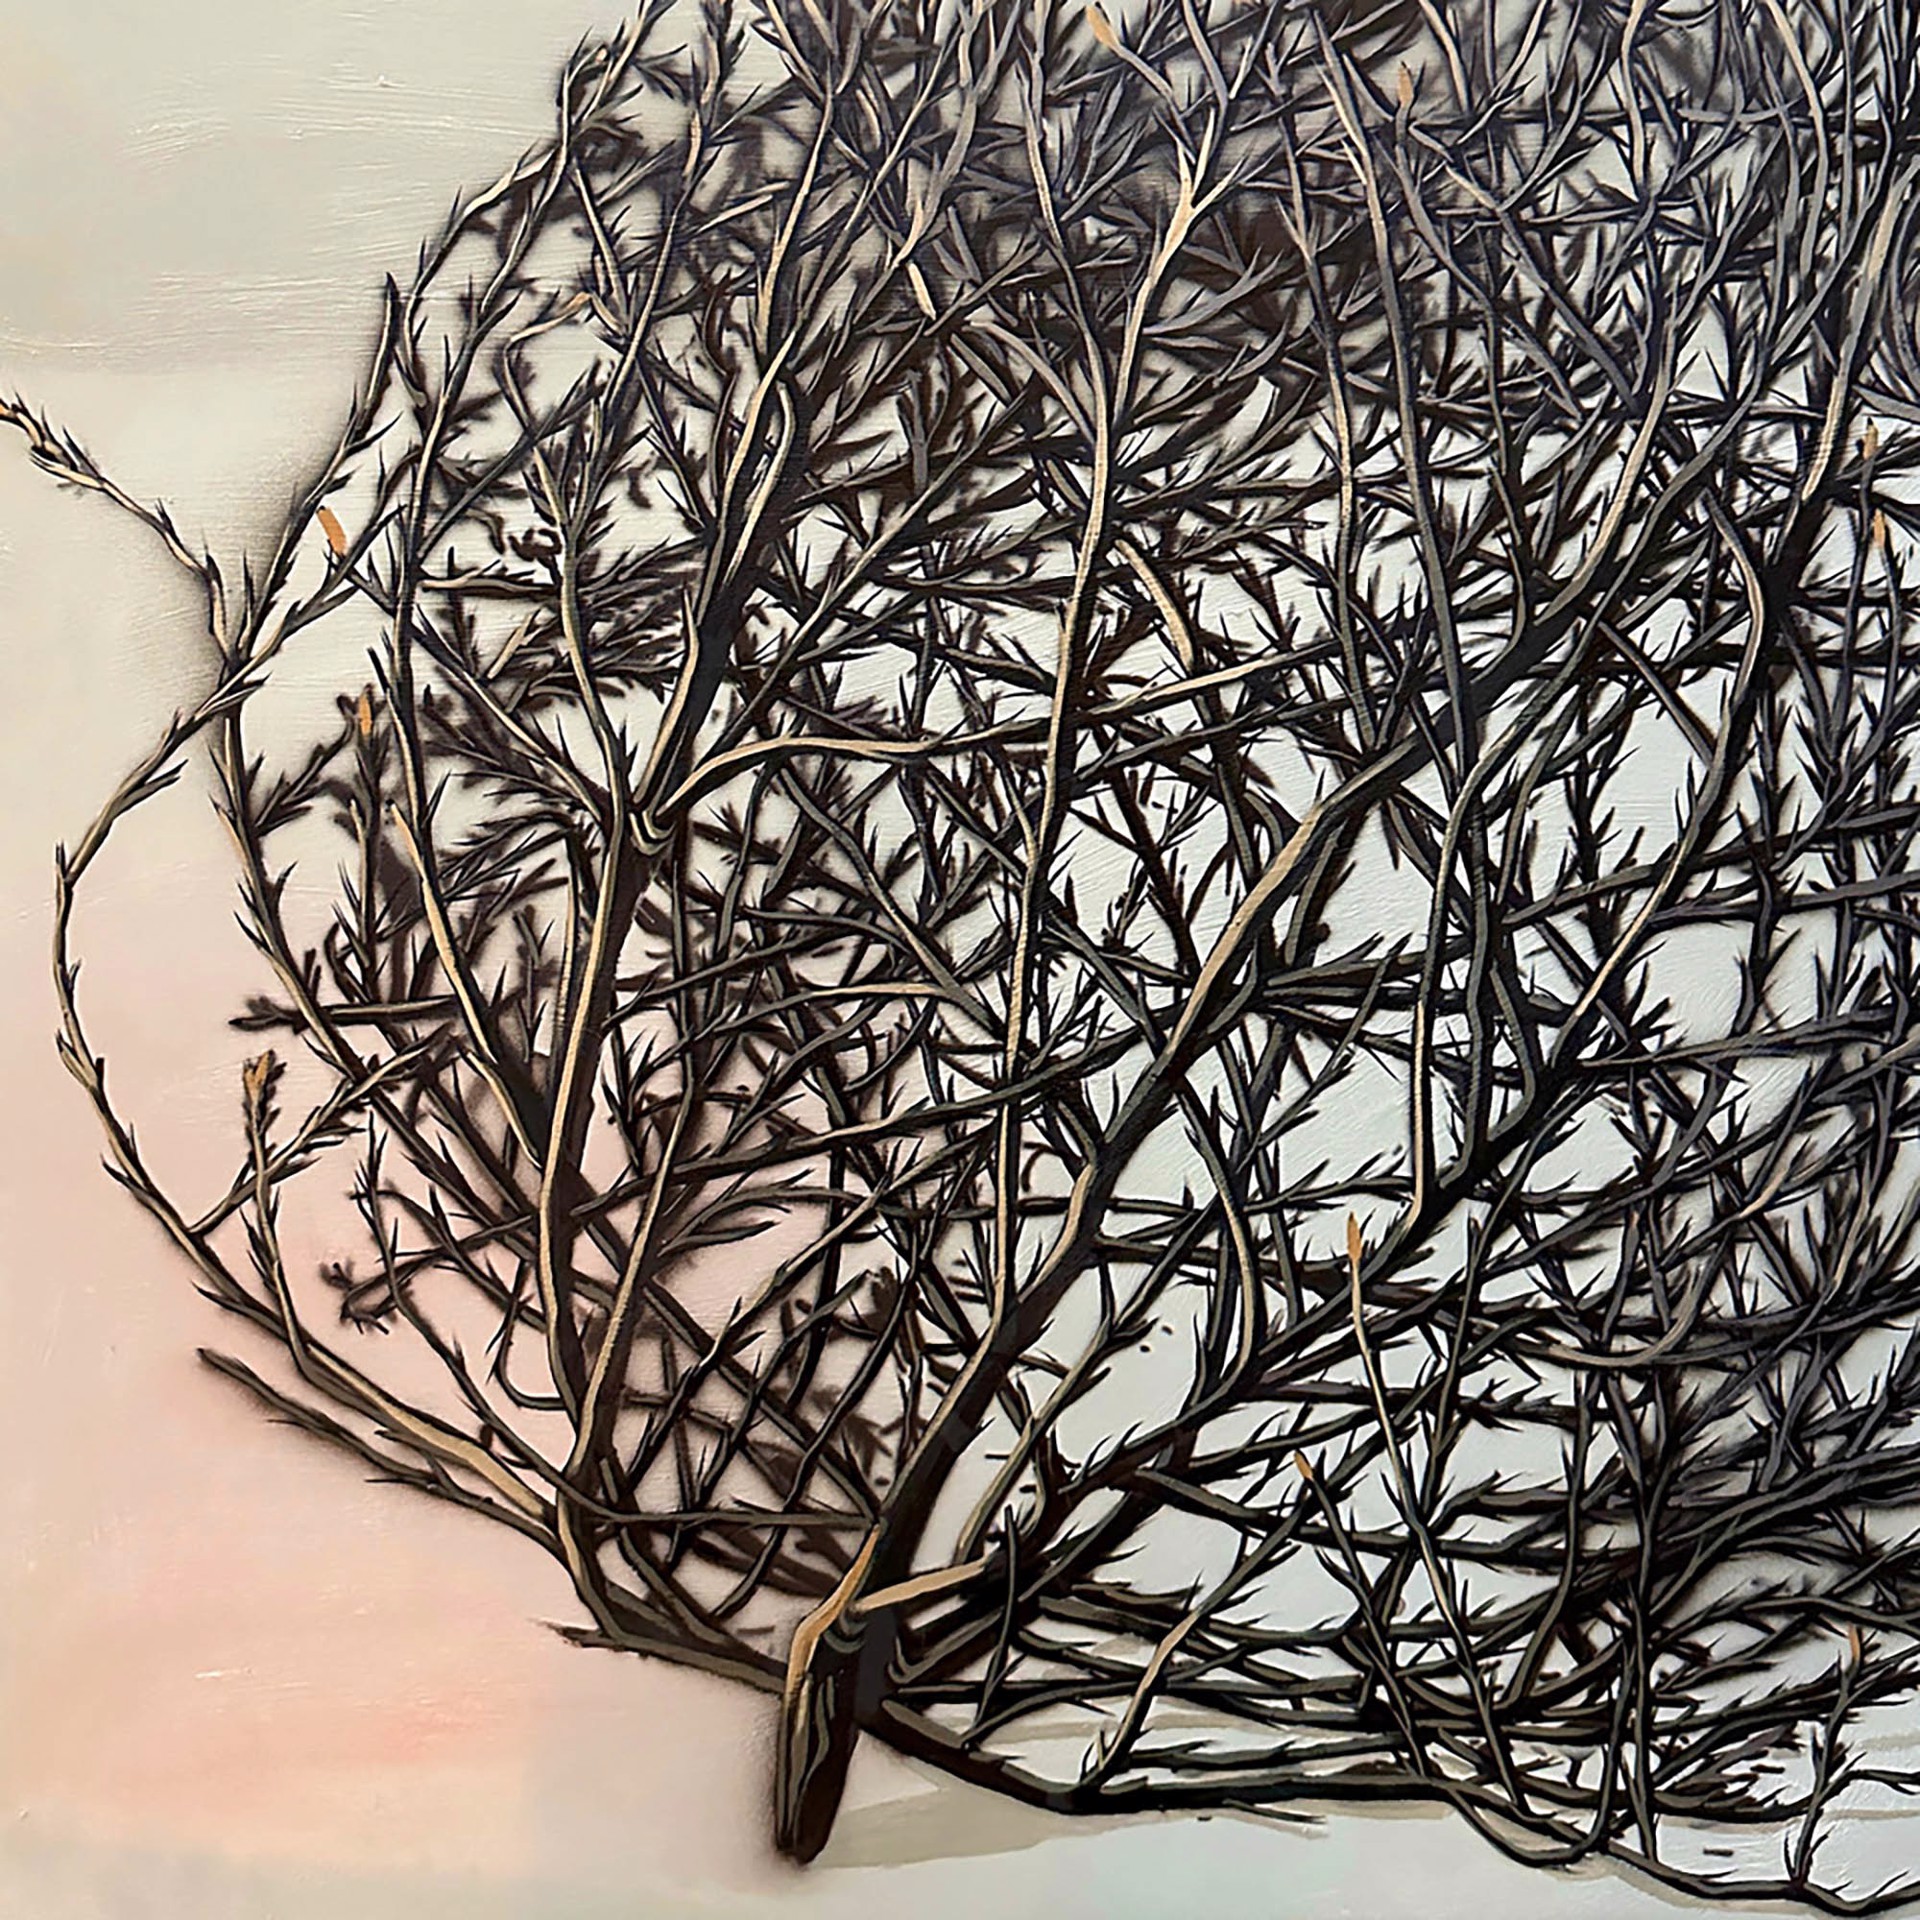 Original Painting by Christy Stallop Featuring a Tumbleweed on a Light Tan Background